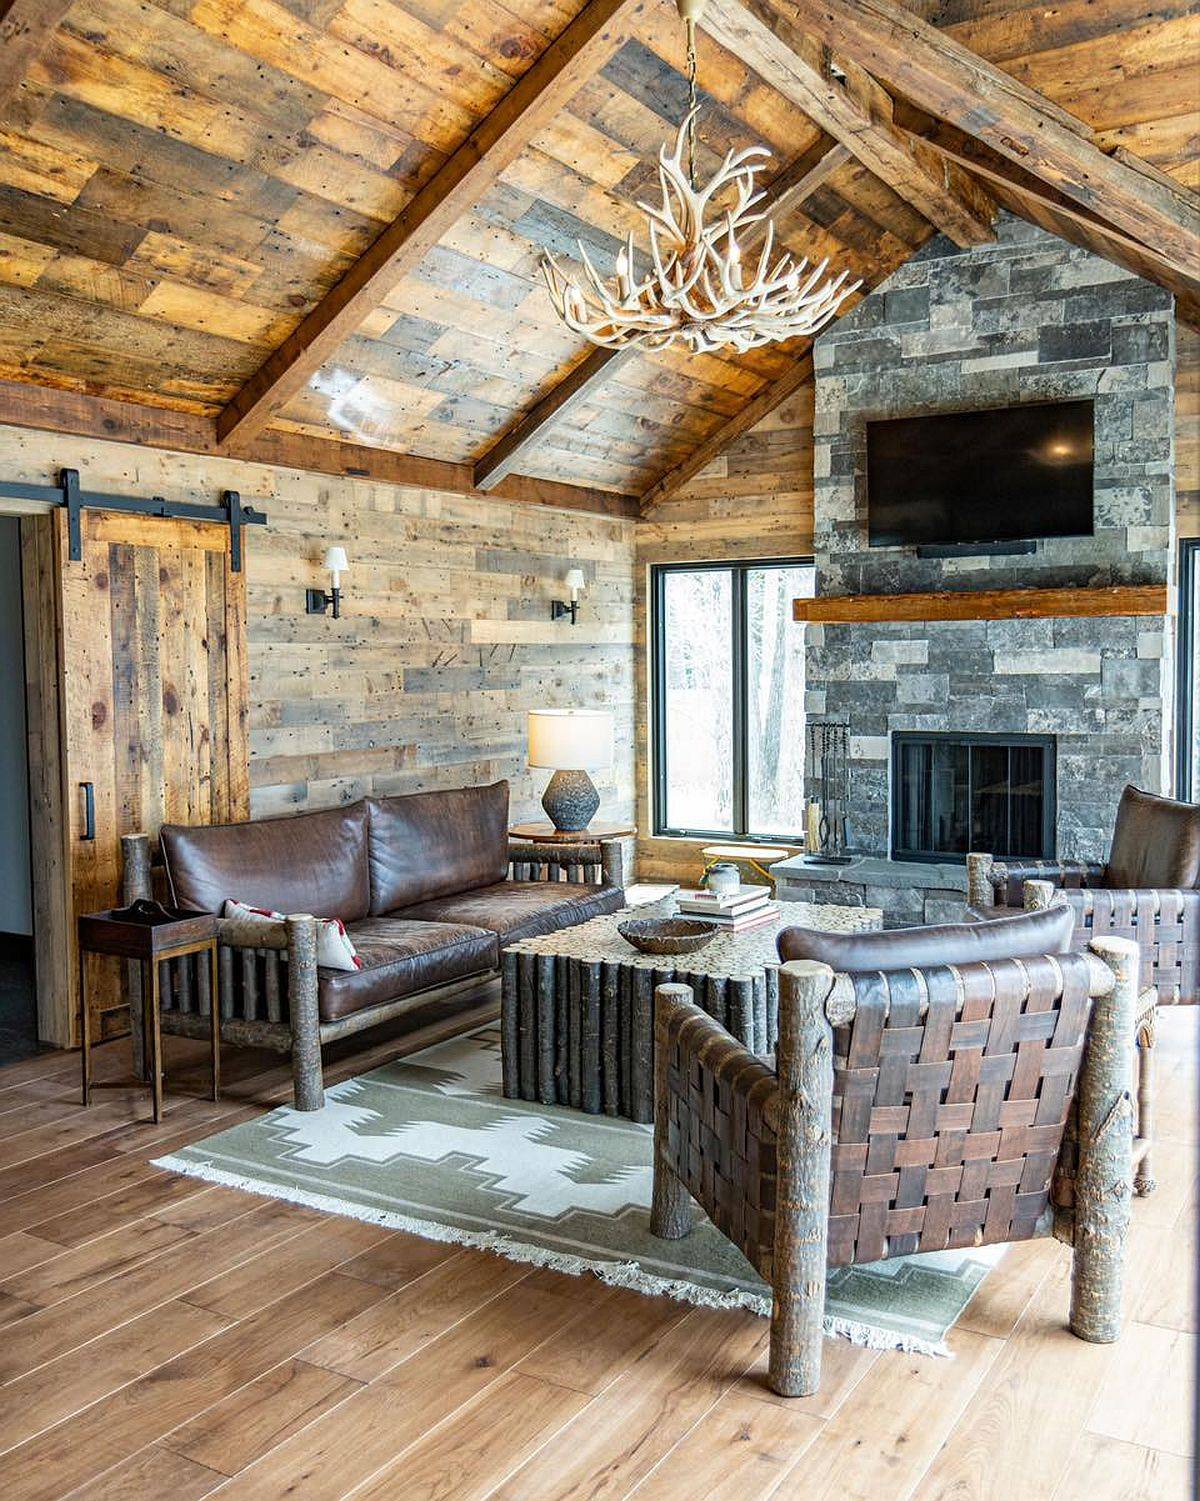 Reclaimed-pine-wood-panels-for-the-modern-rustic-living-space-45507